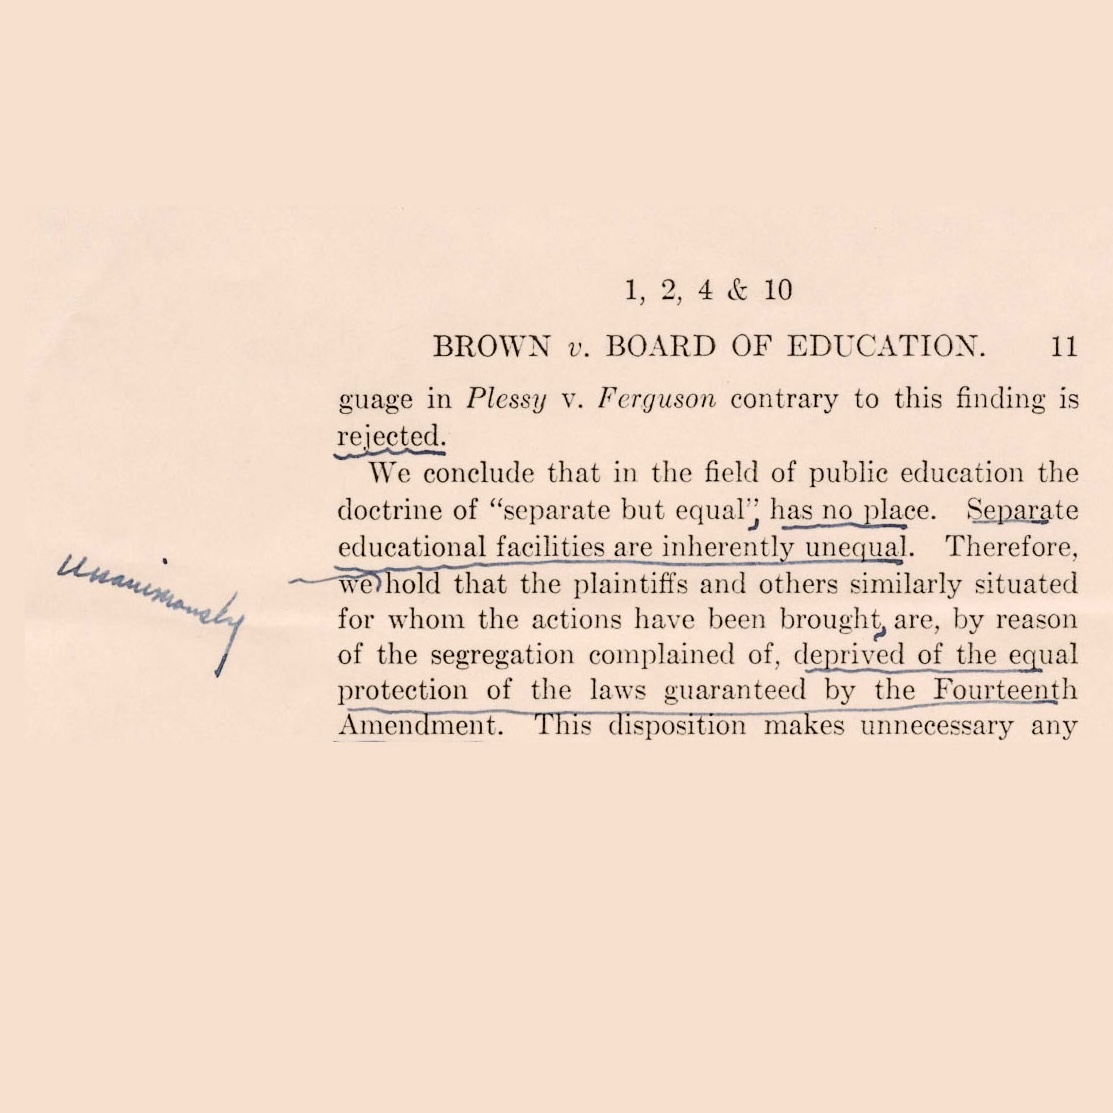 _Brown_ slip opinion. Credit: Papers of Earl Warren. Manuscript Division. Library of Congress.